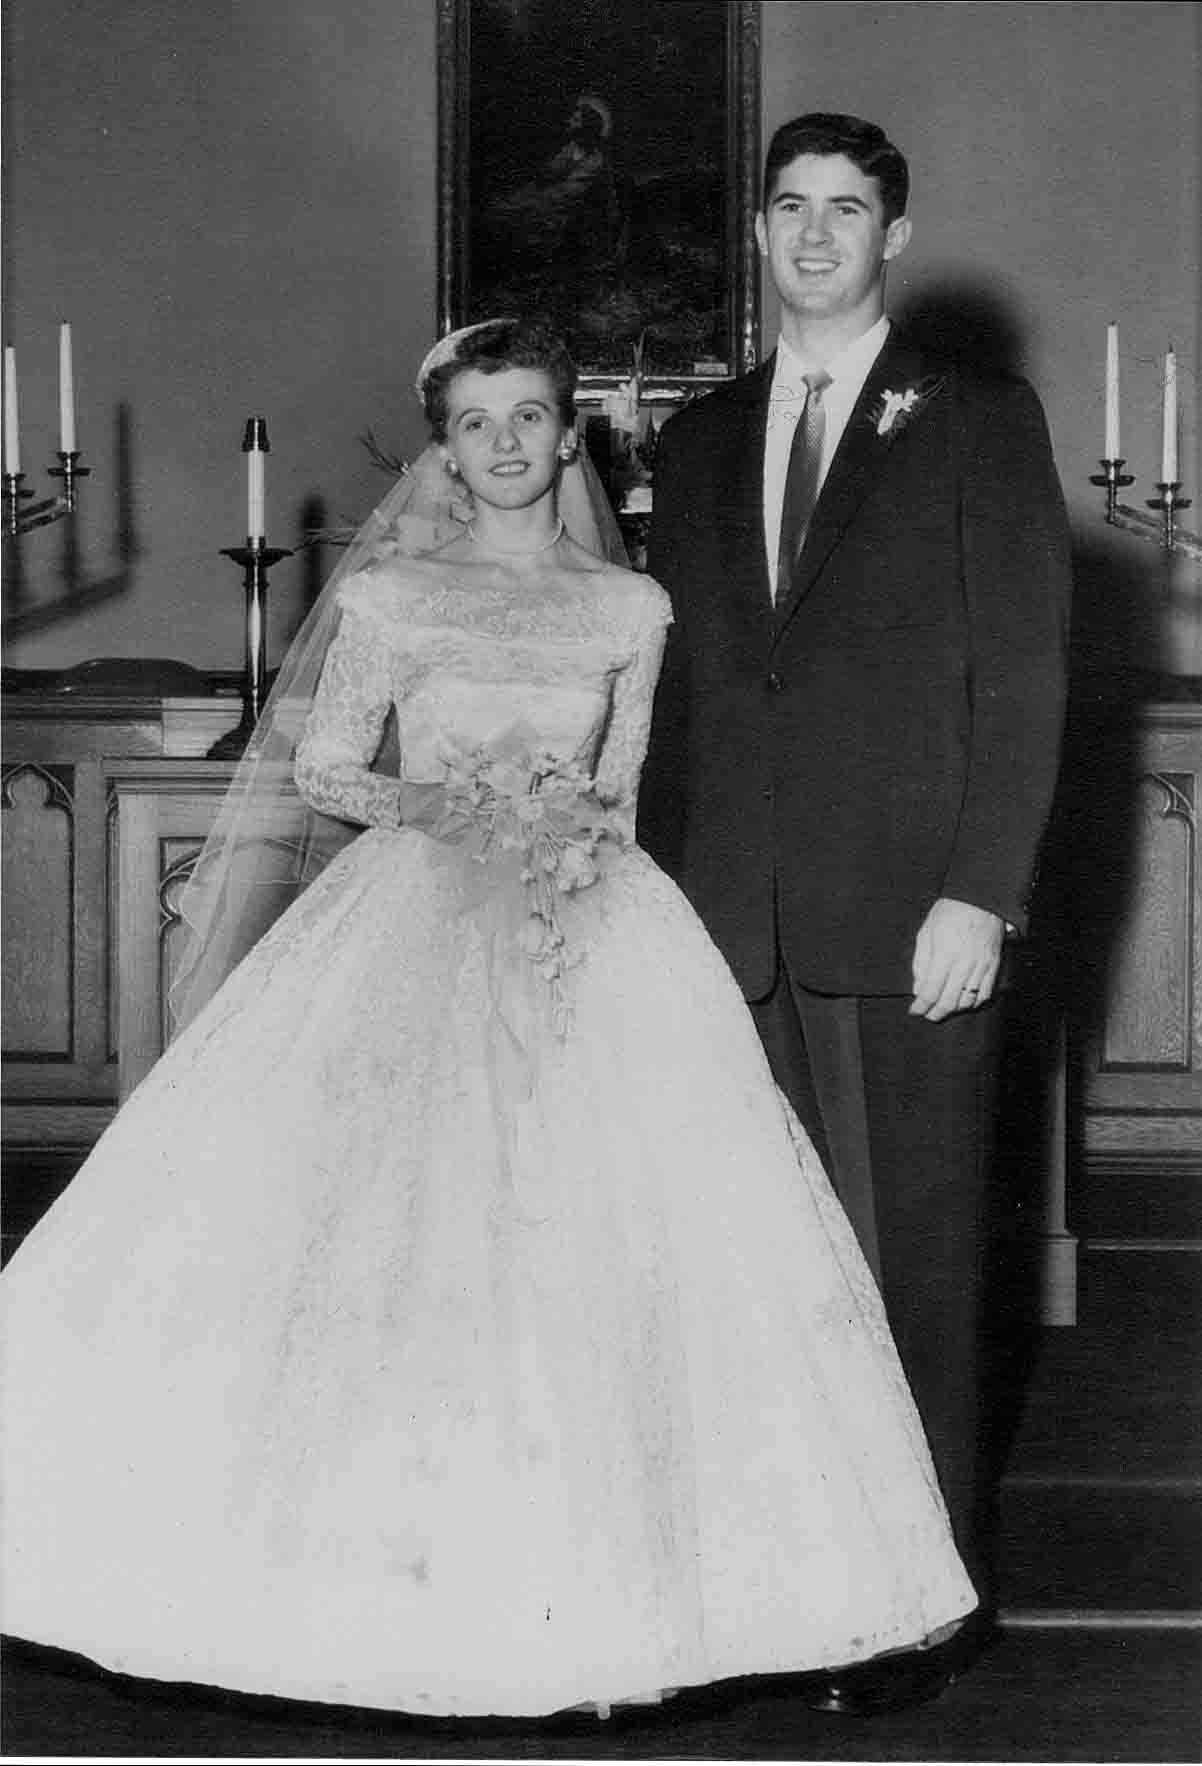 mom and dad wedding pic 1955